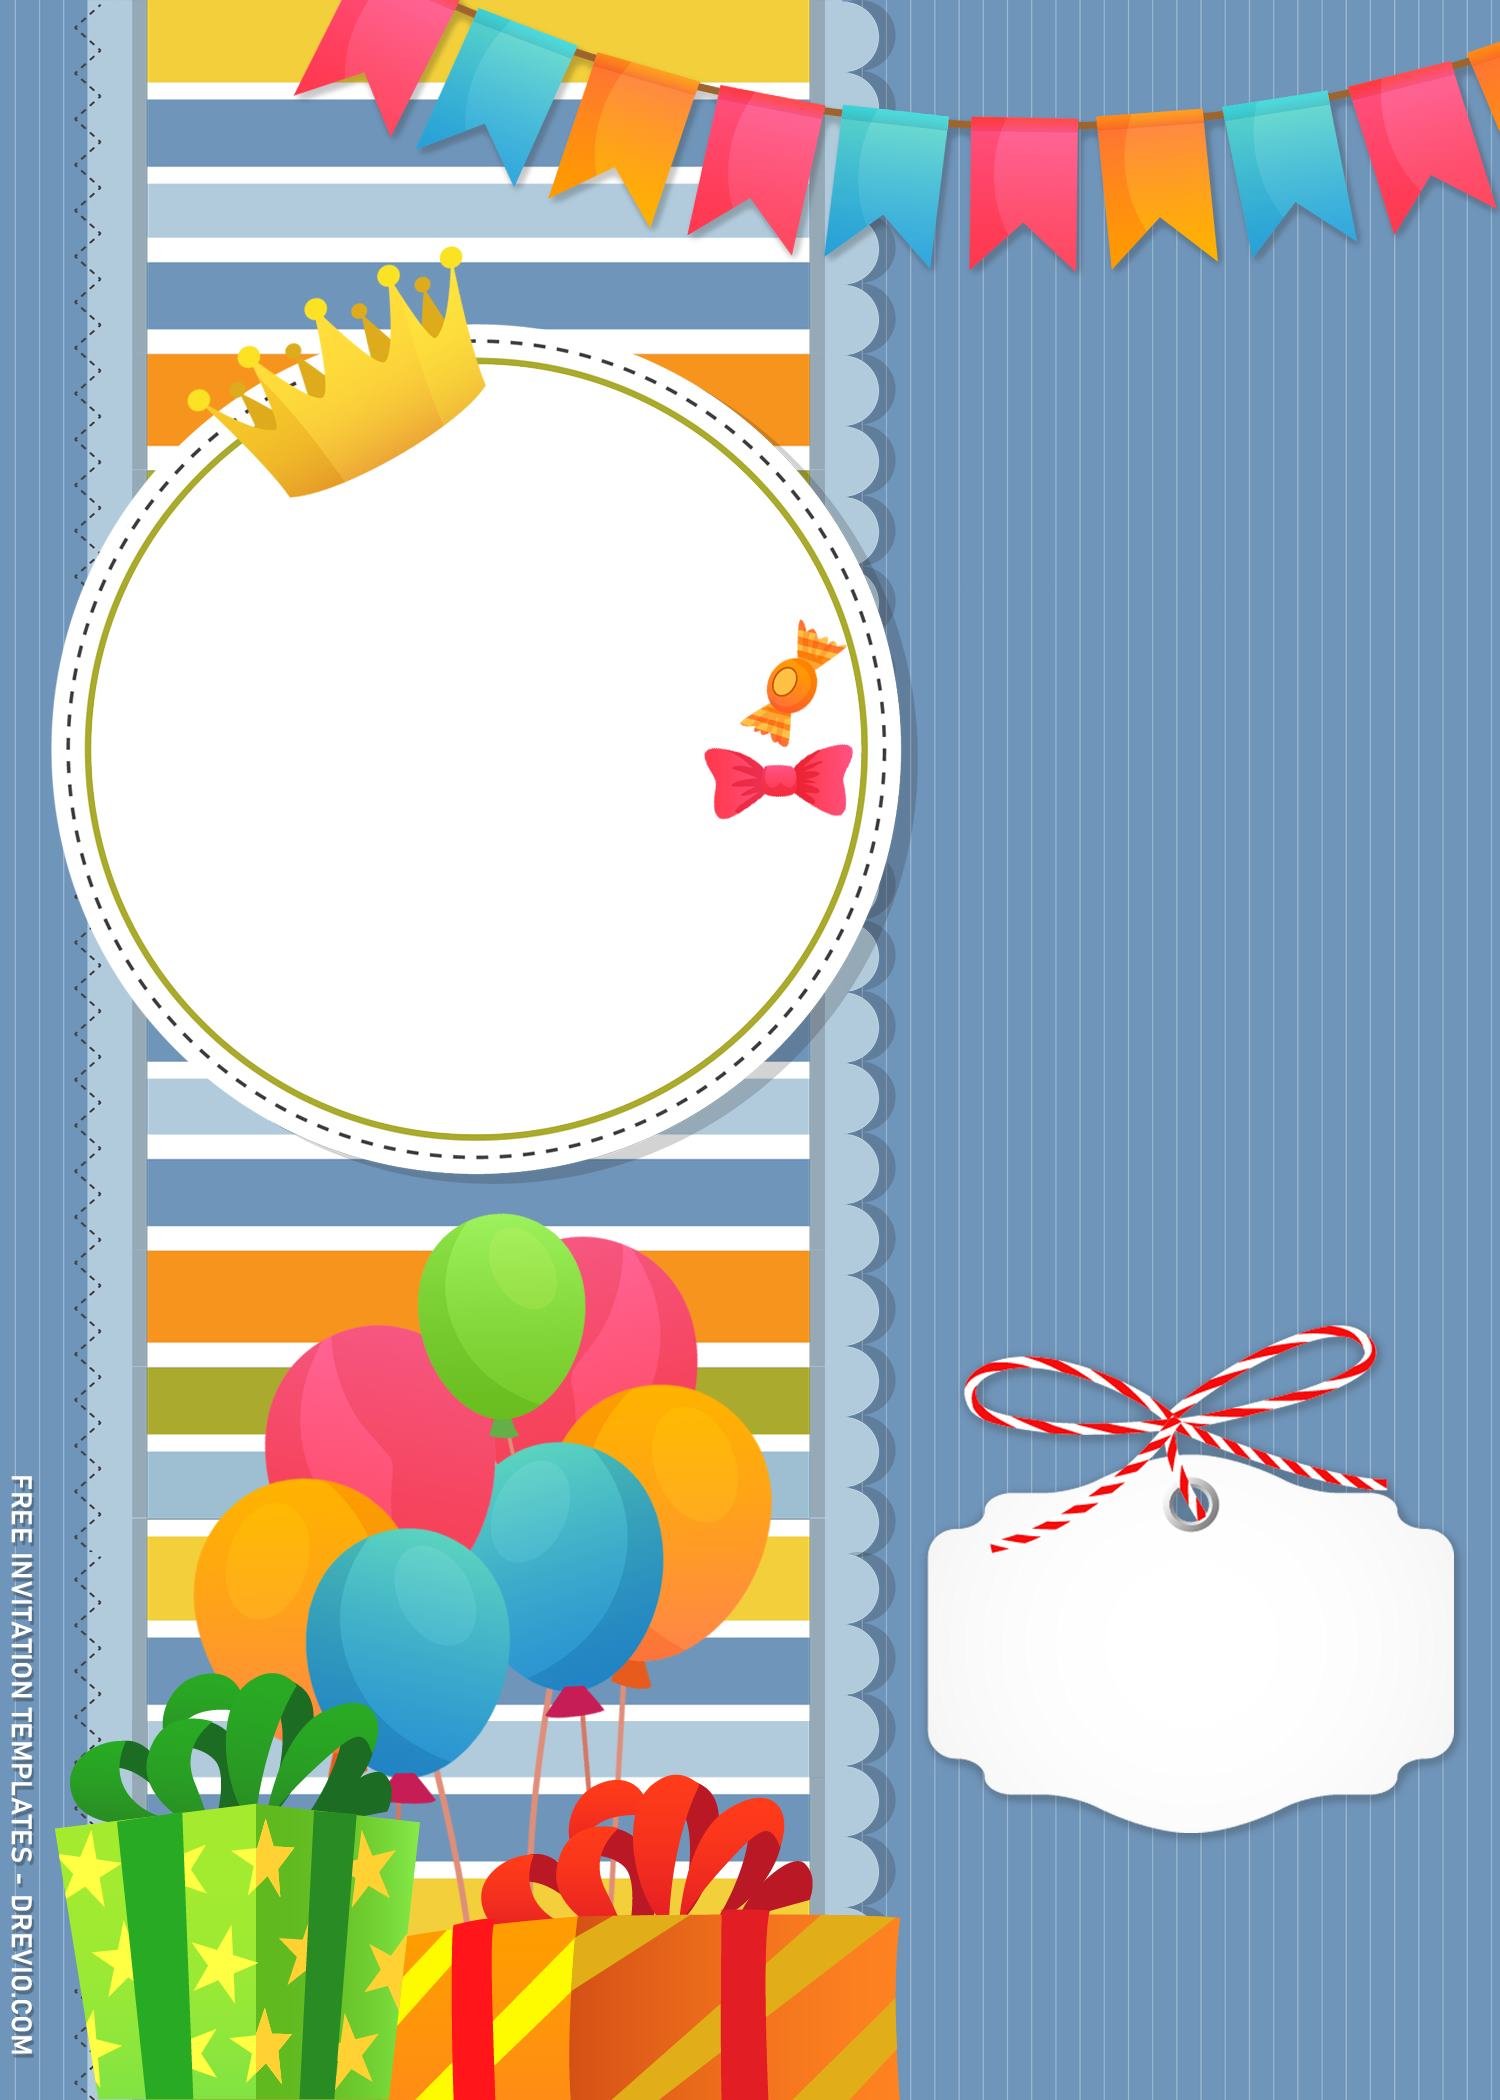 8+ Personalized Cute Birthday Invitation Templates For Boys and Girls |  Download Hundreds FREE PRINTABLE Birthday Invitation Templates